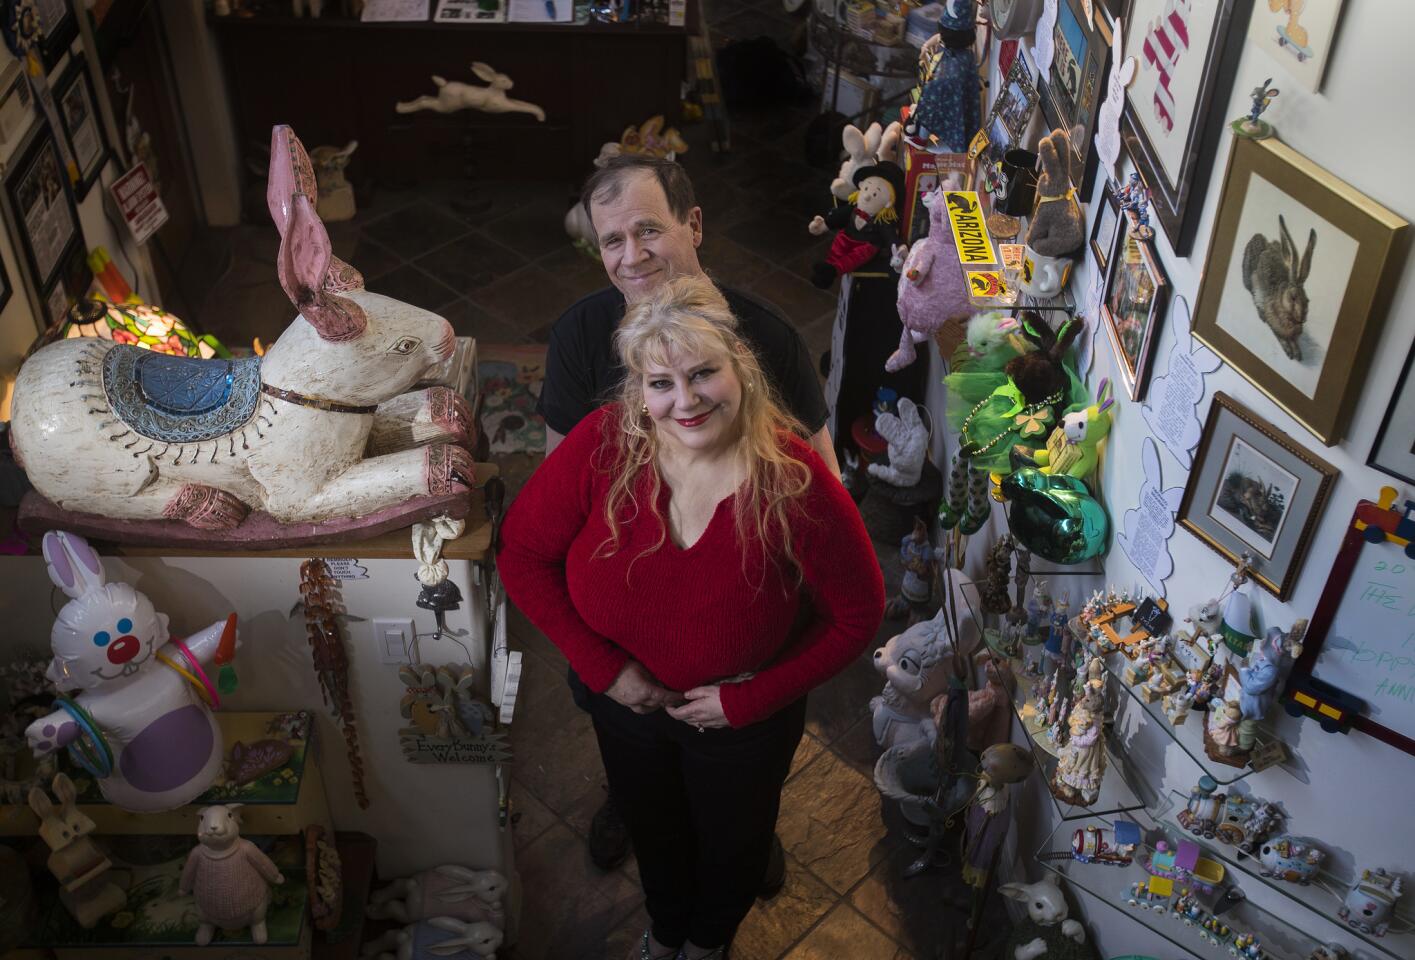 Candace Frazee and her husband, Steve Lubanski, started the Bunny Museum in 1998. Now, there are more than 35,000 rabbit-related items at their spot in Altadena.